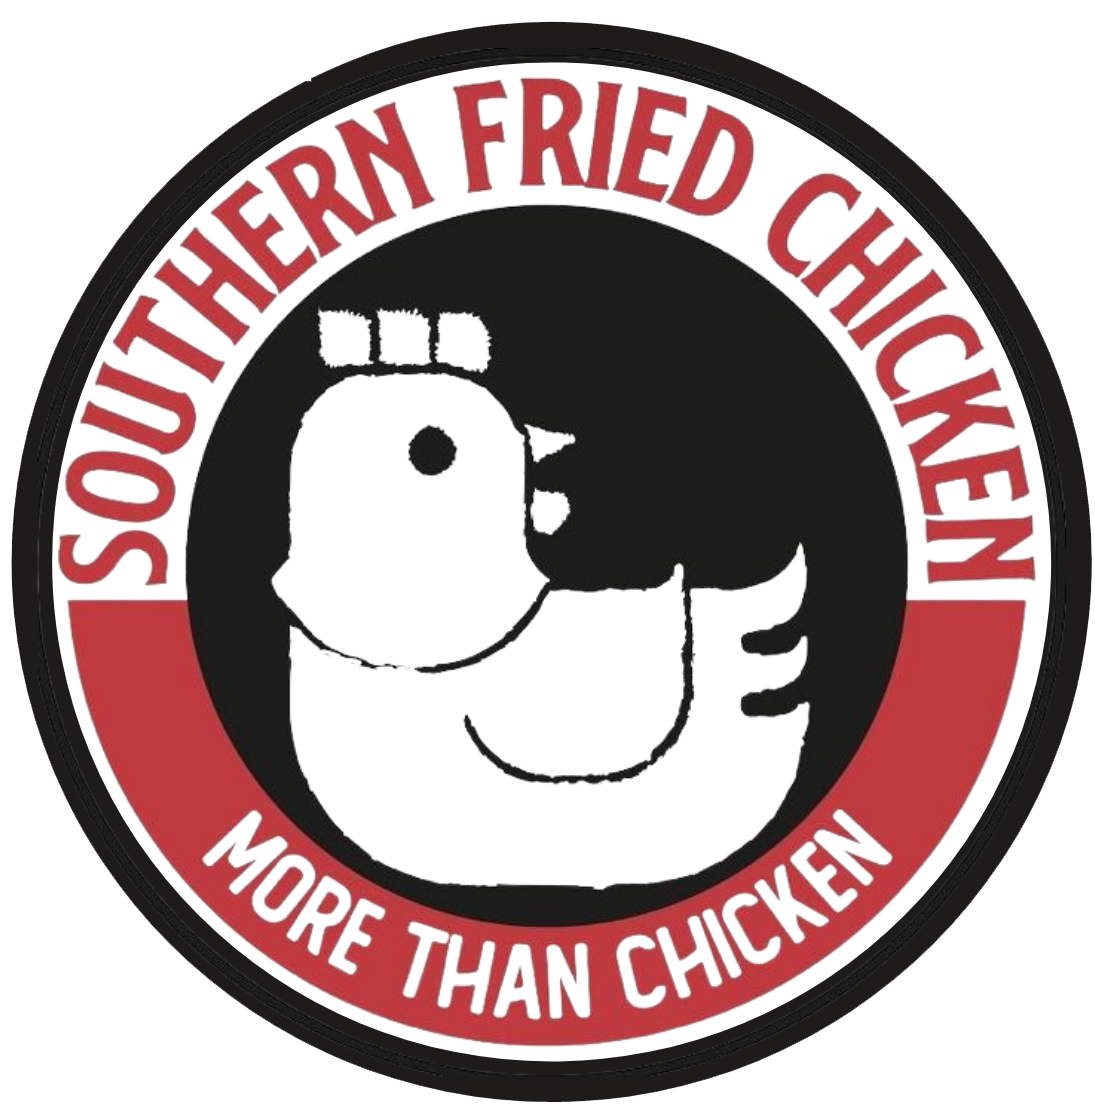 Southern Fried Chicken Chester Logo